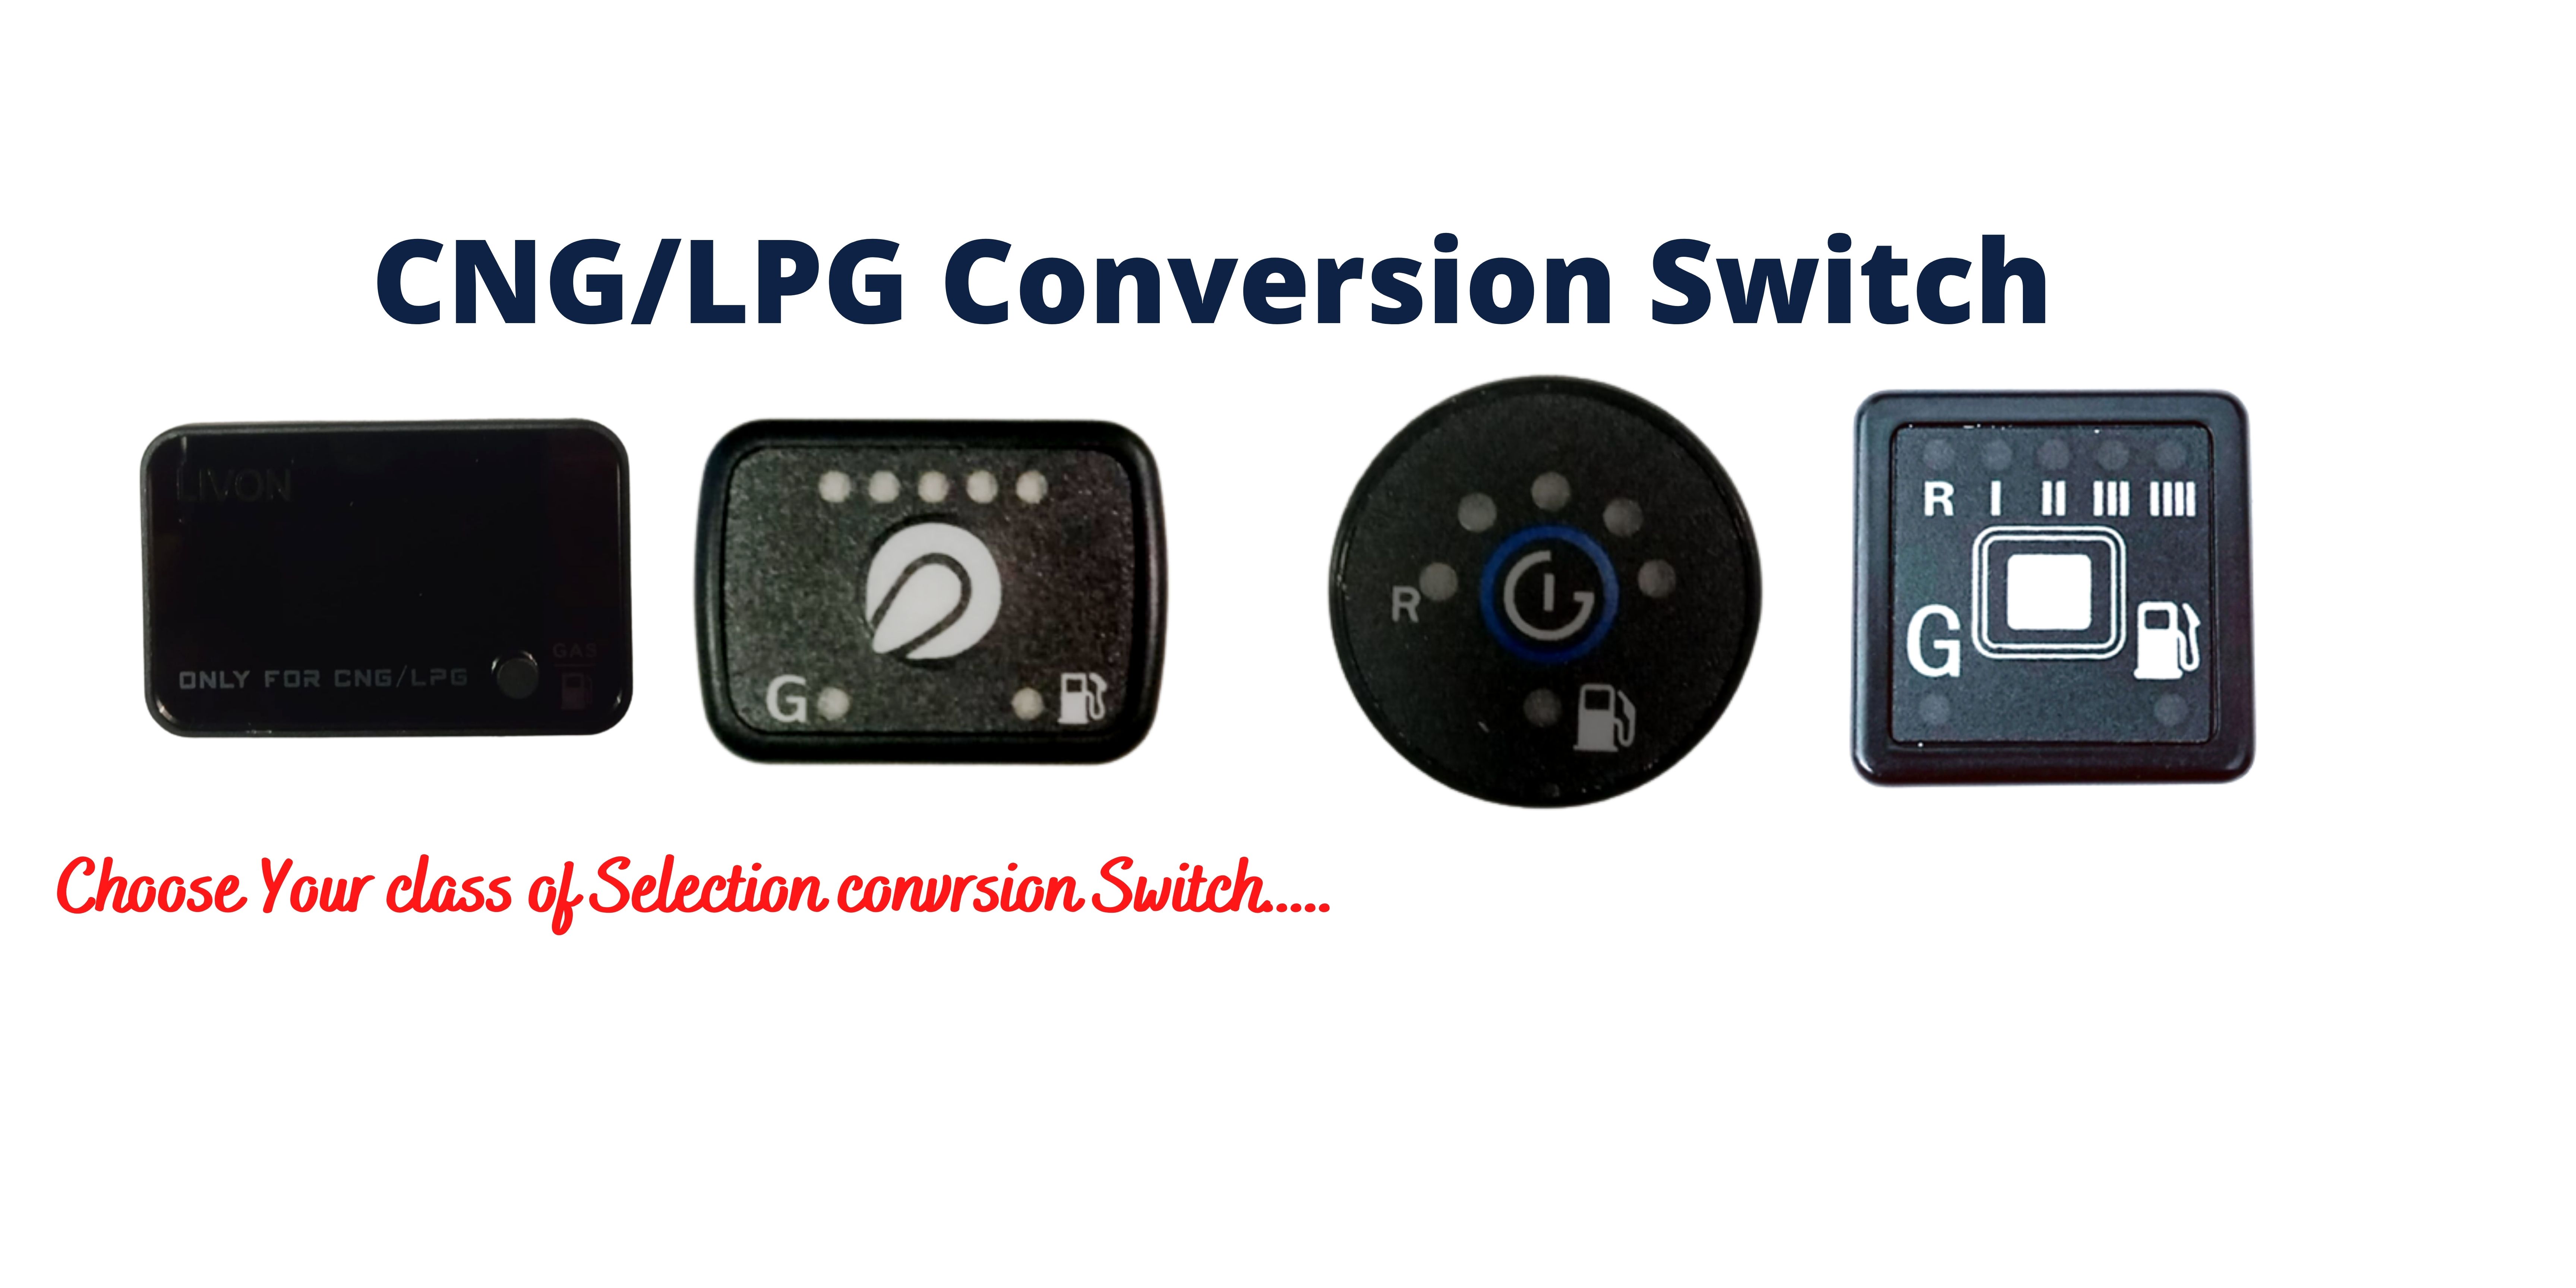 CNG/LPG Conversion Switch | Livon Gas Equipments | cng switch, conversion switch, cng kit in delhi, cng kit in India, best cng kit - GLK4022